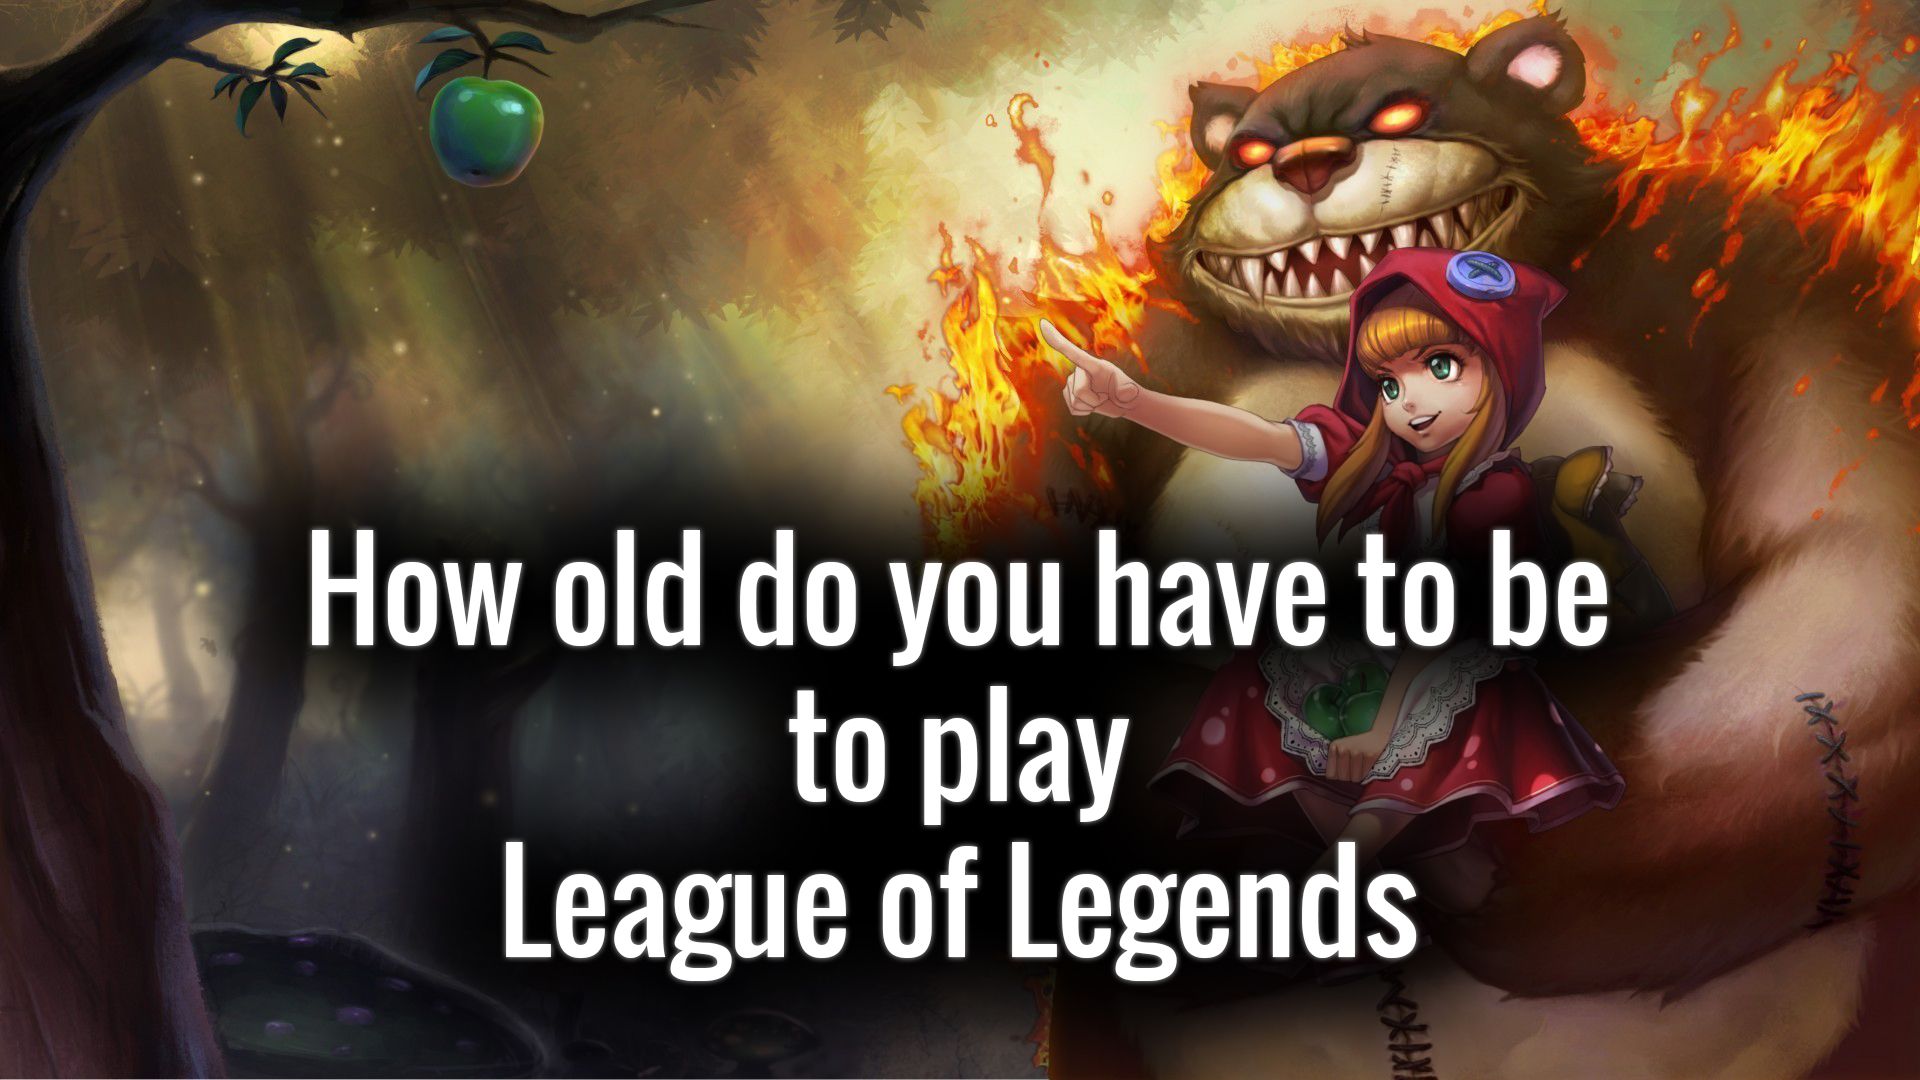 Age Requirement for League of Legends